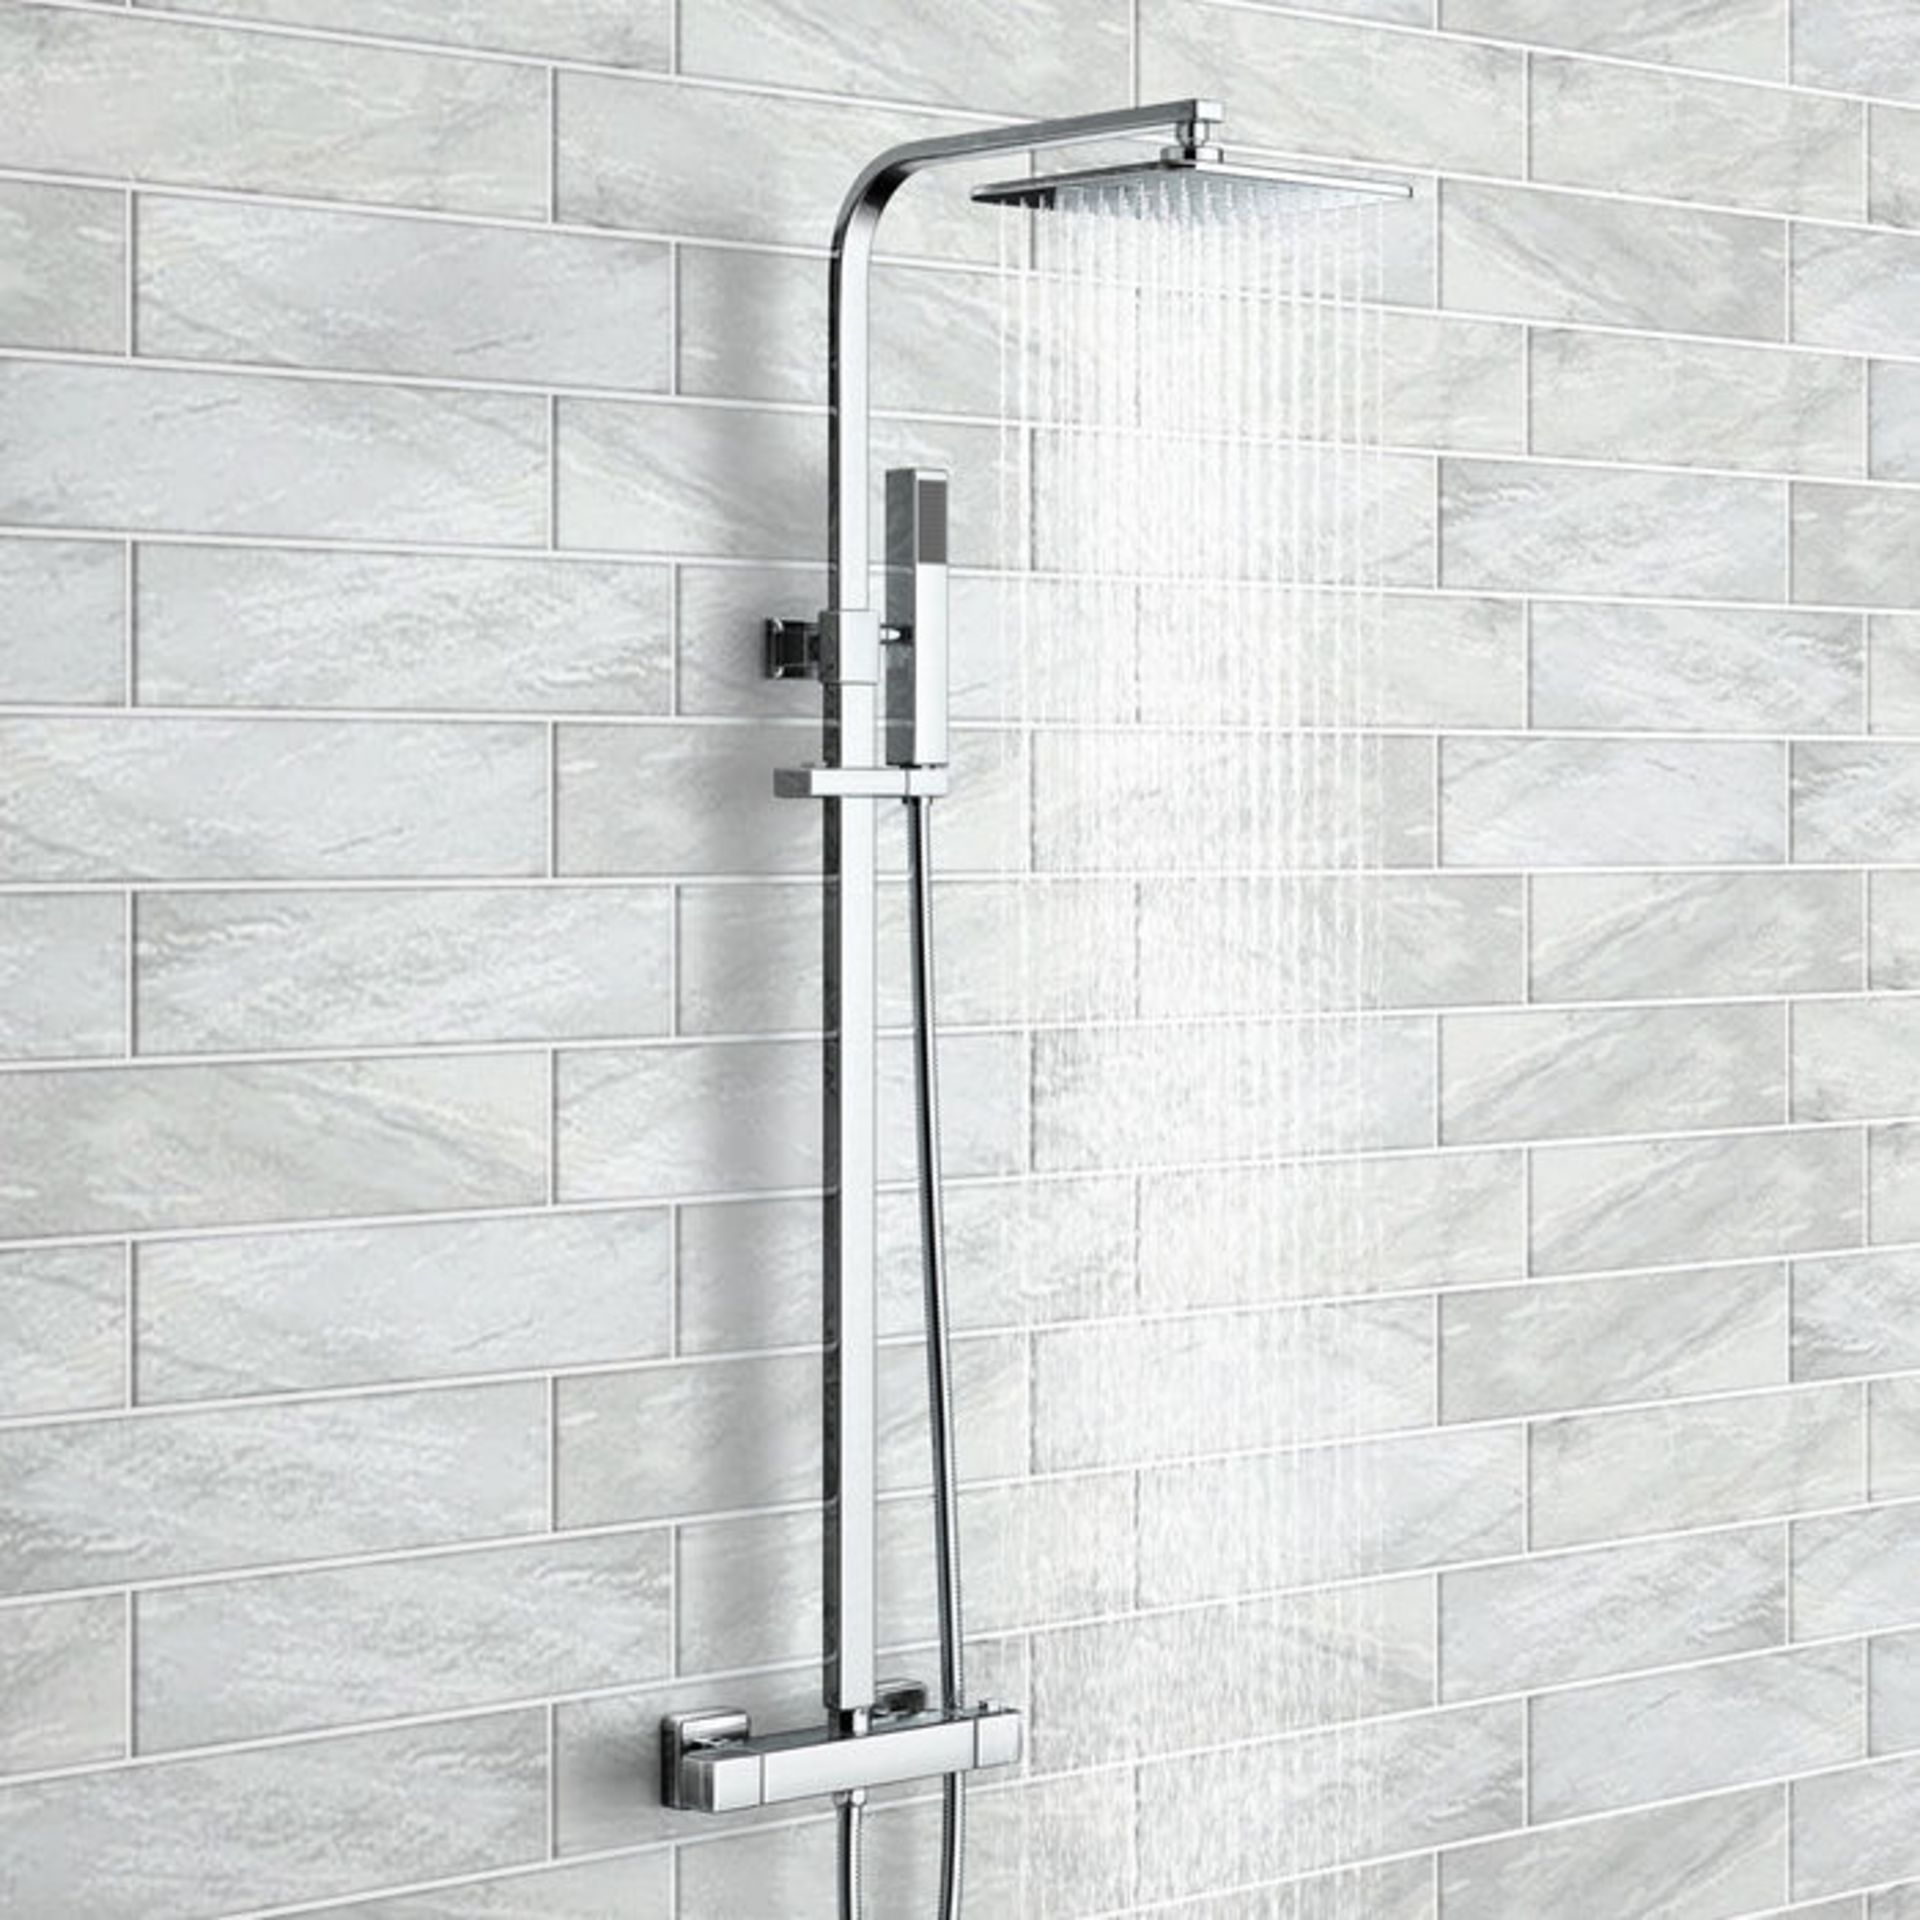 (G64) Square Exposed Thermostatic Shower Kit & Medium Head. Style meets function with our gorgeous